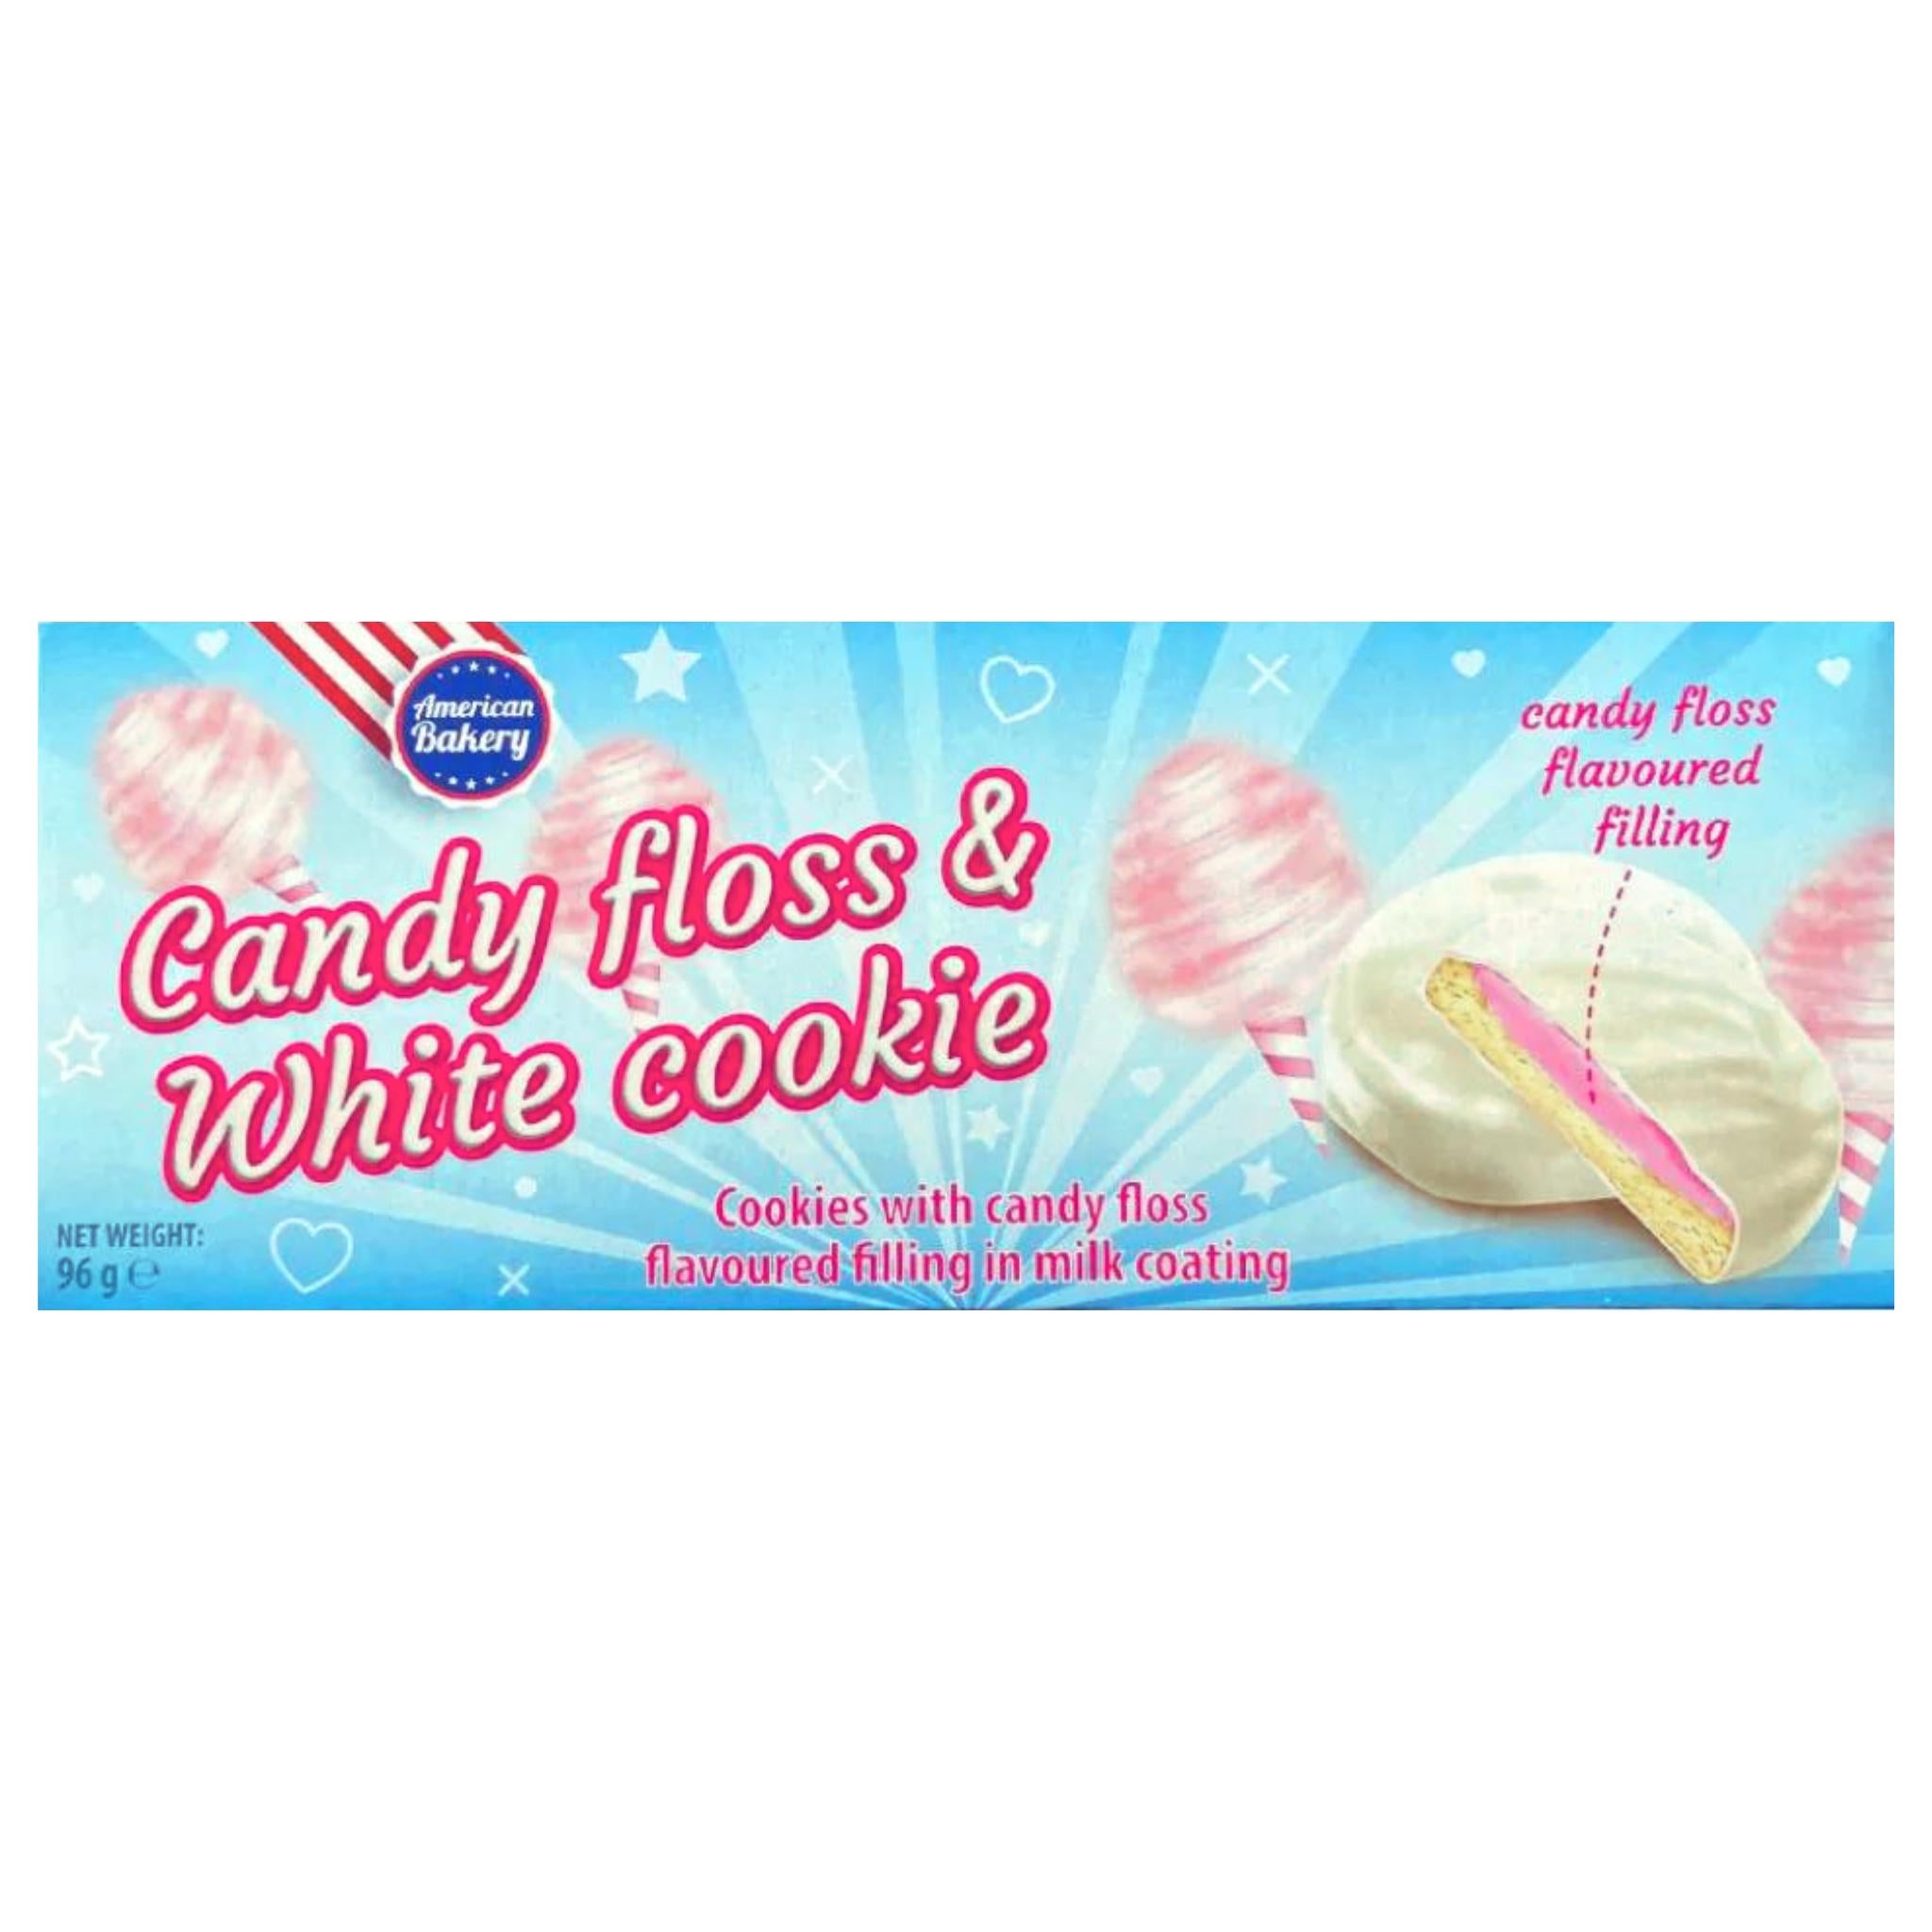 American Bakery Candy Floss & White Cookie - 96g